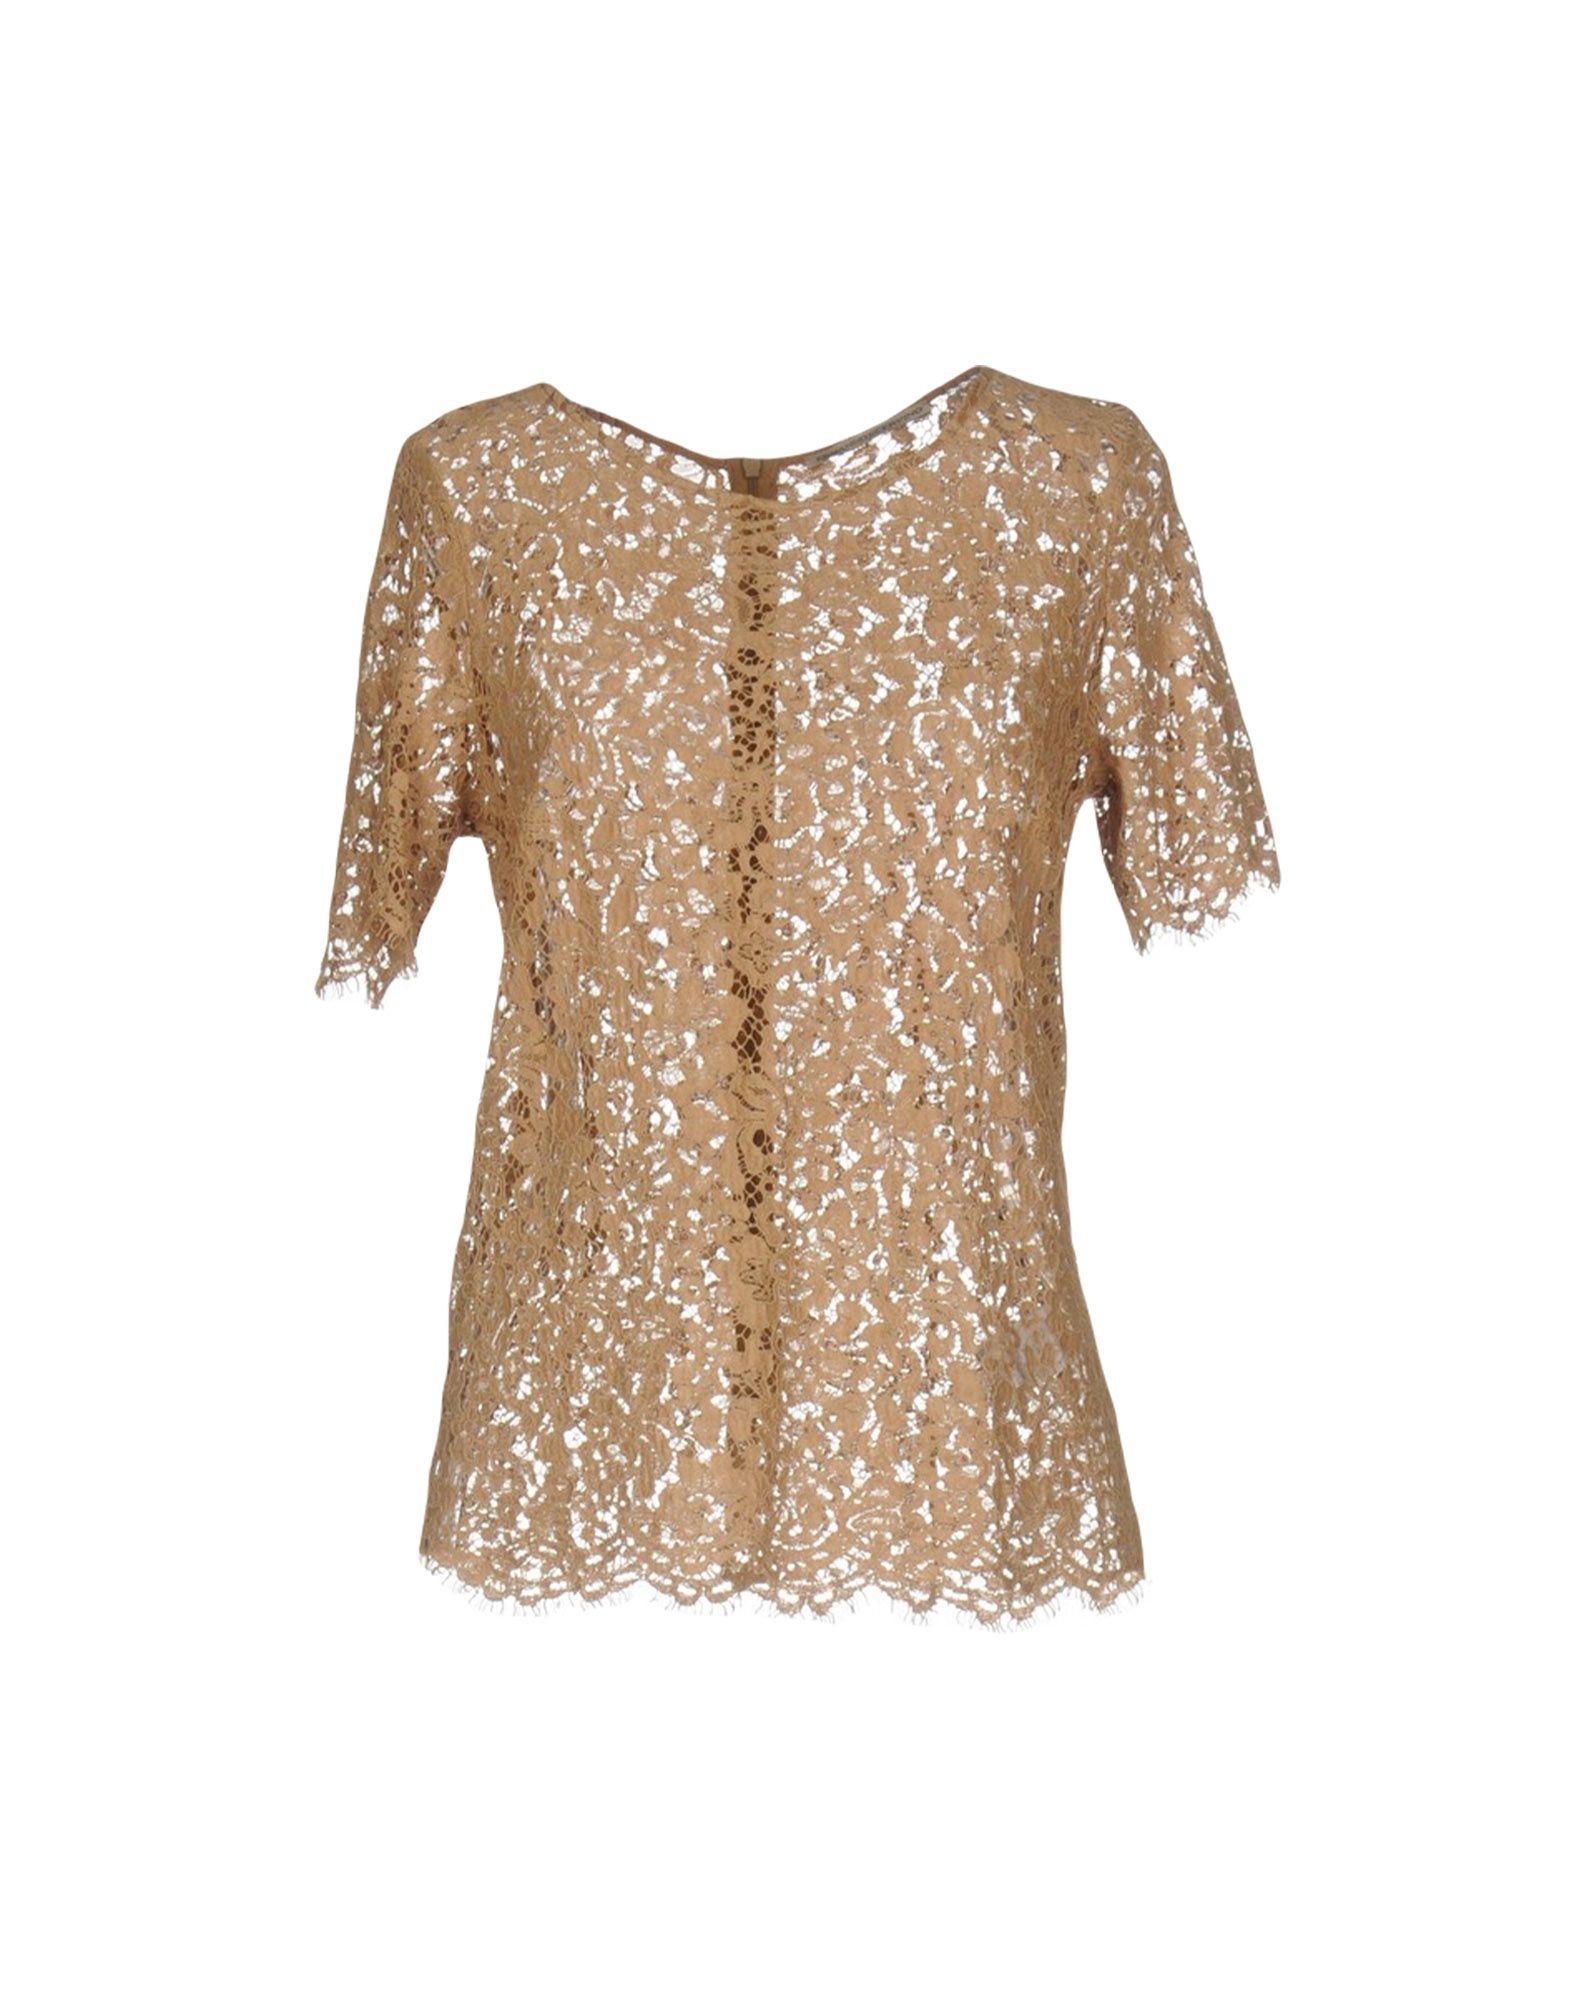 Lyst - Ermanno Scervino Blouse in Natural